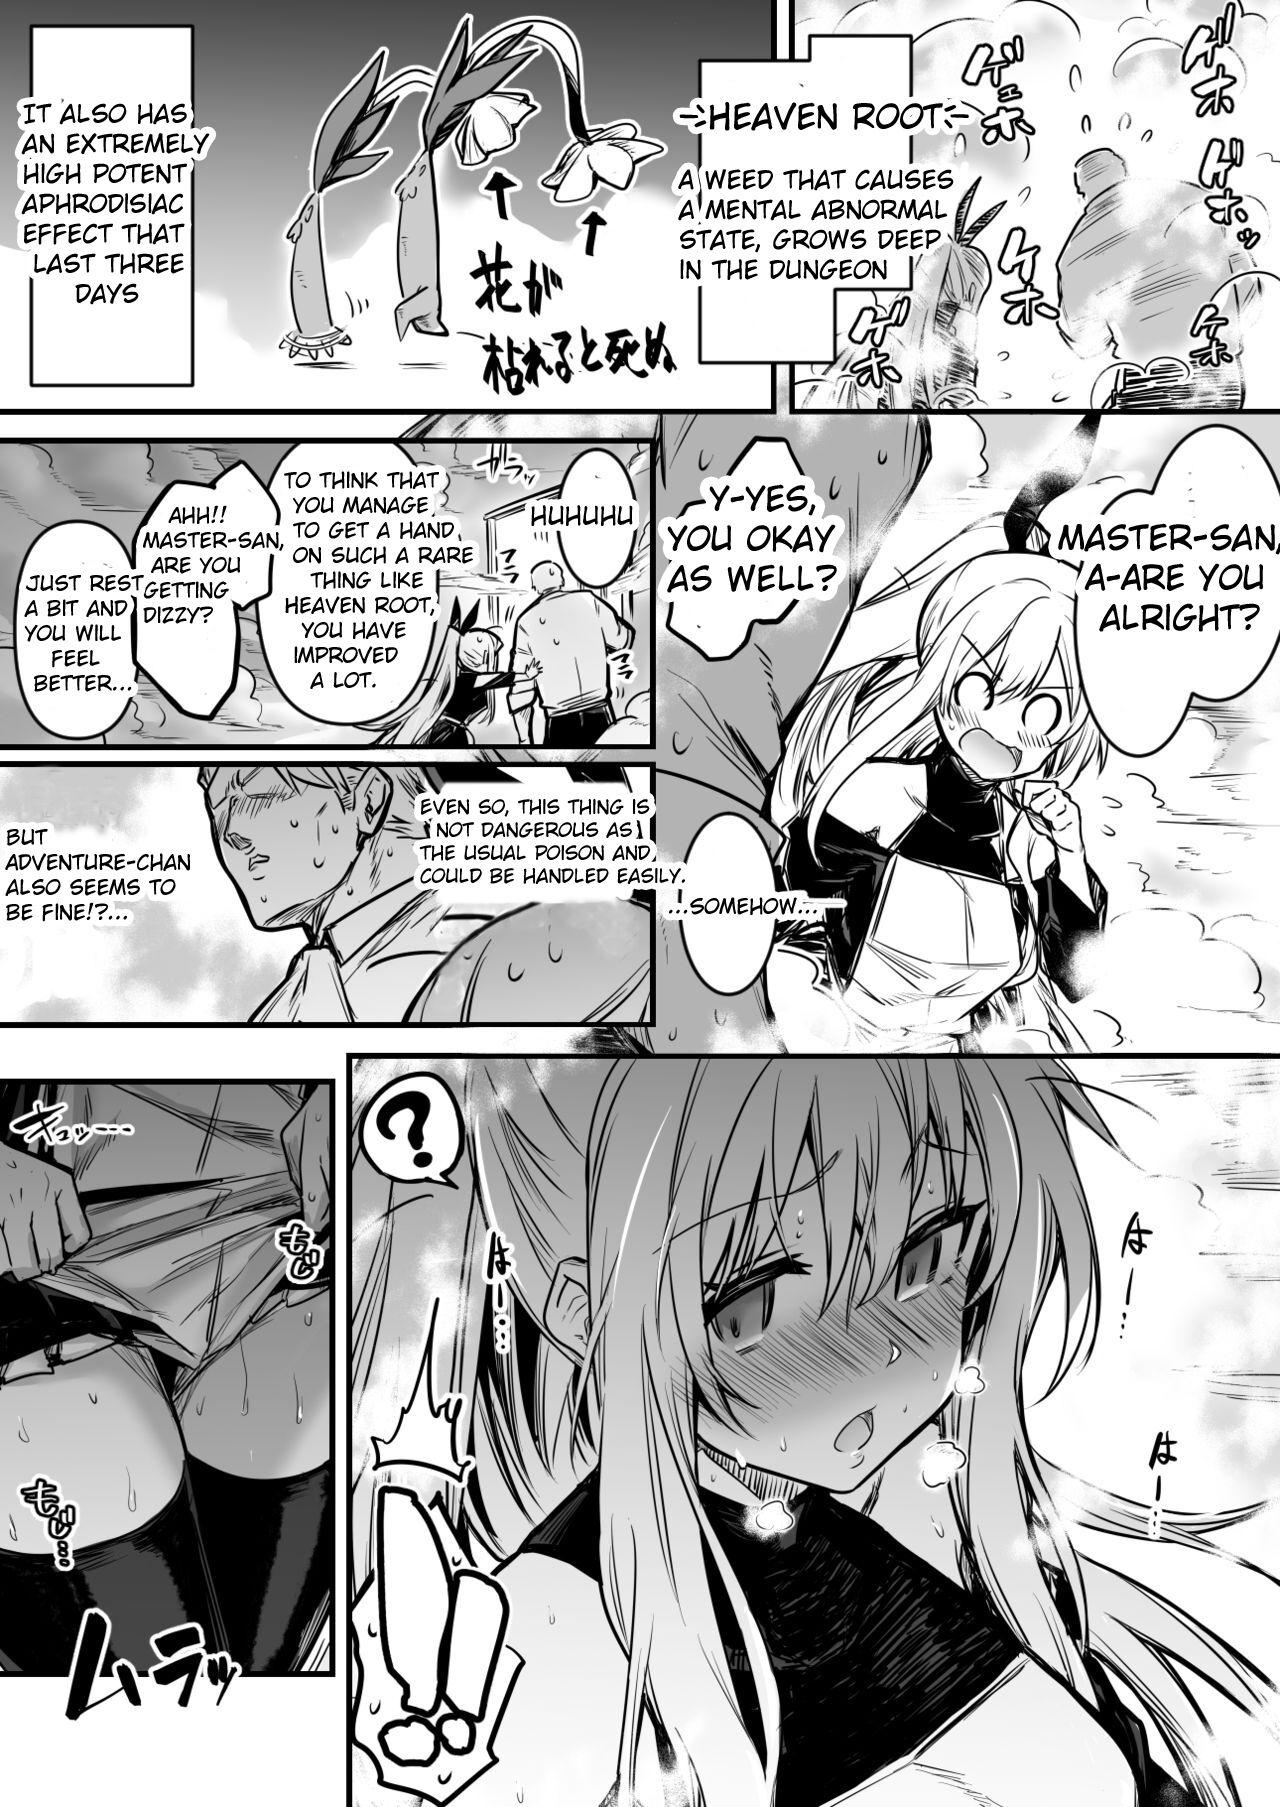 Hd Porn Adventure-chan who got heated up by an aphrodisiac plant and got raped by the Tool Shop master for 3 days - Original Menage - Page 2